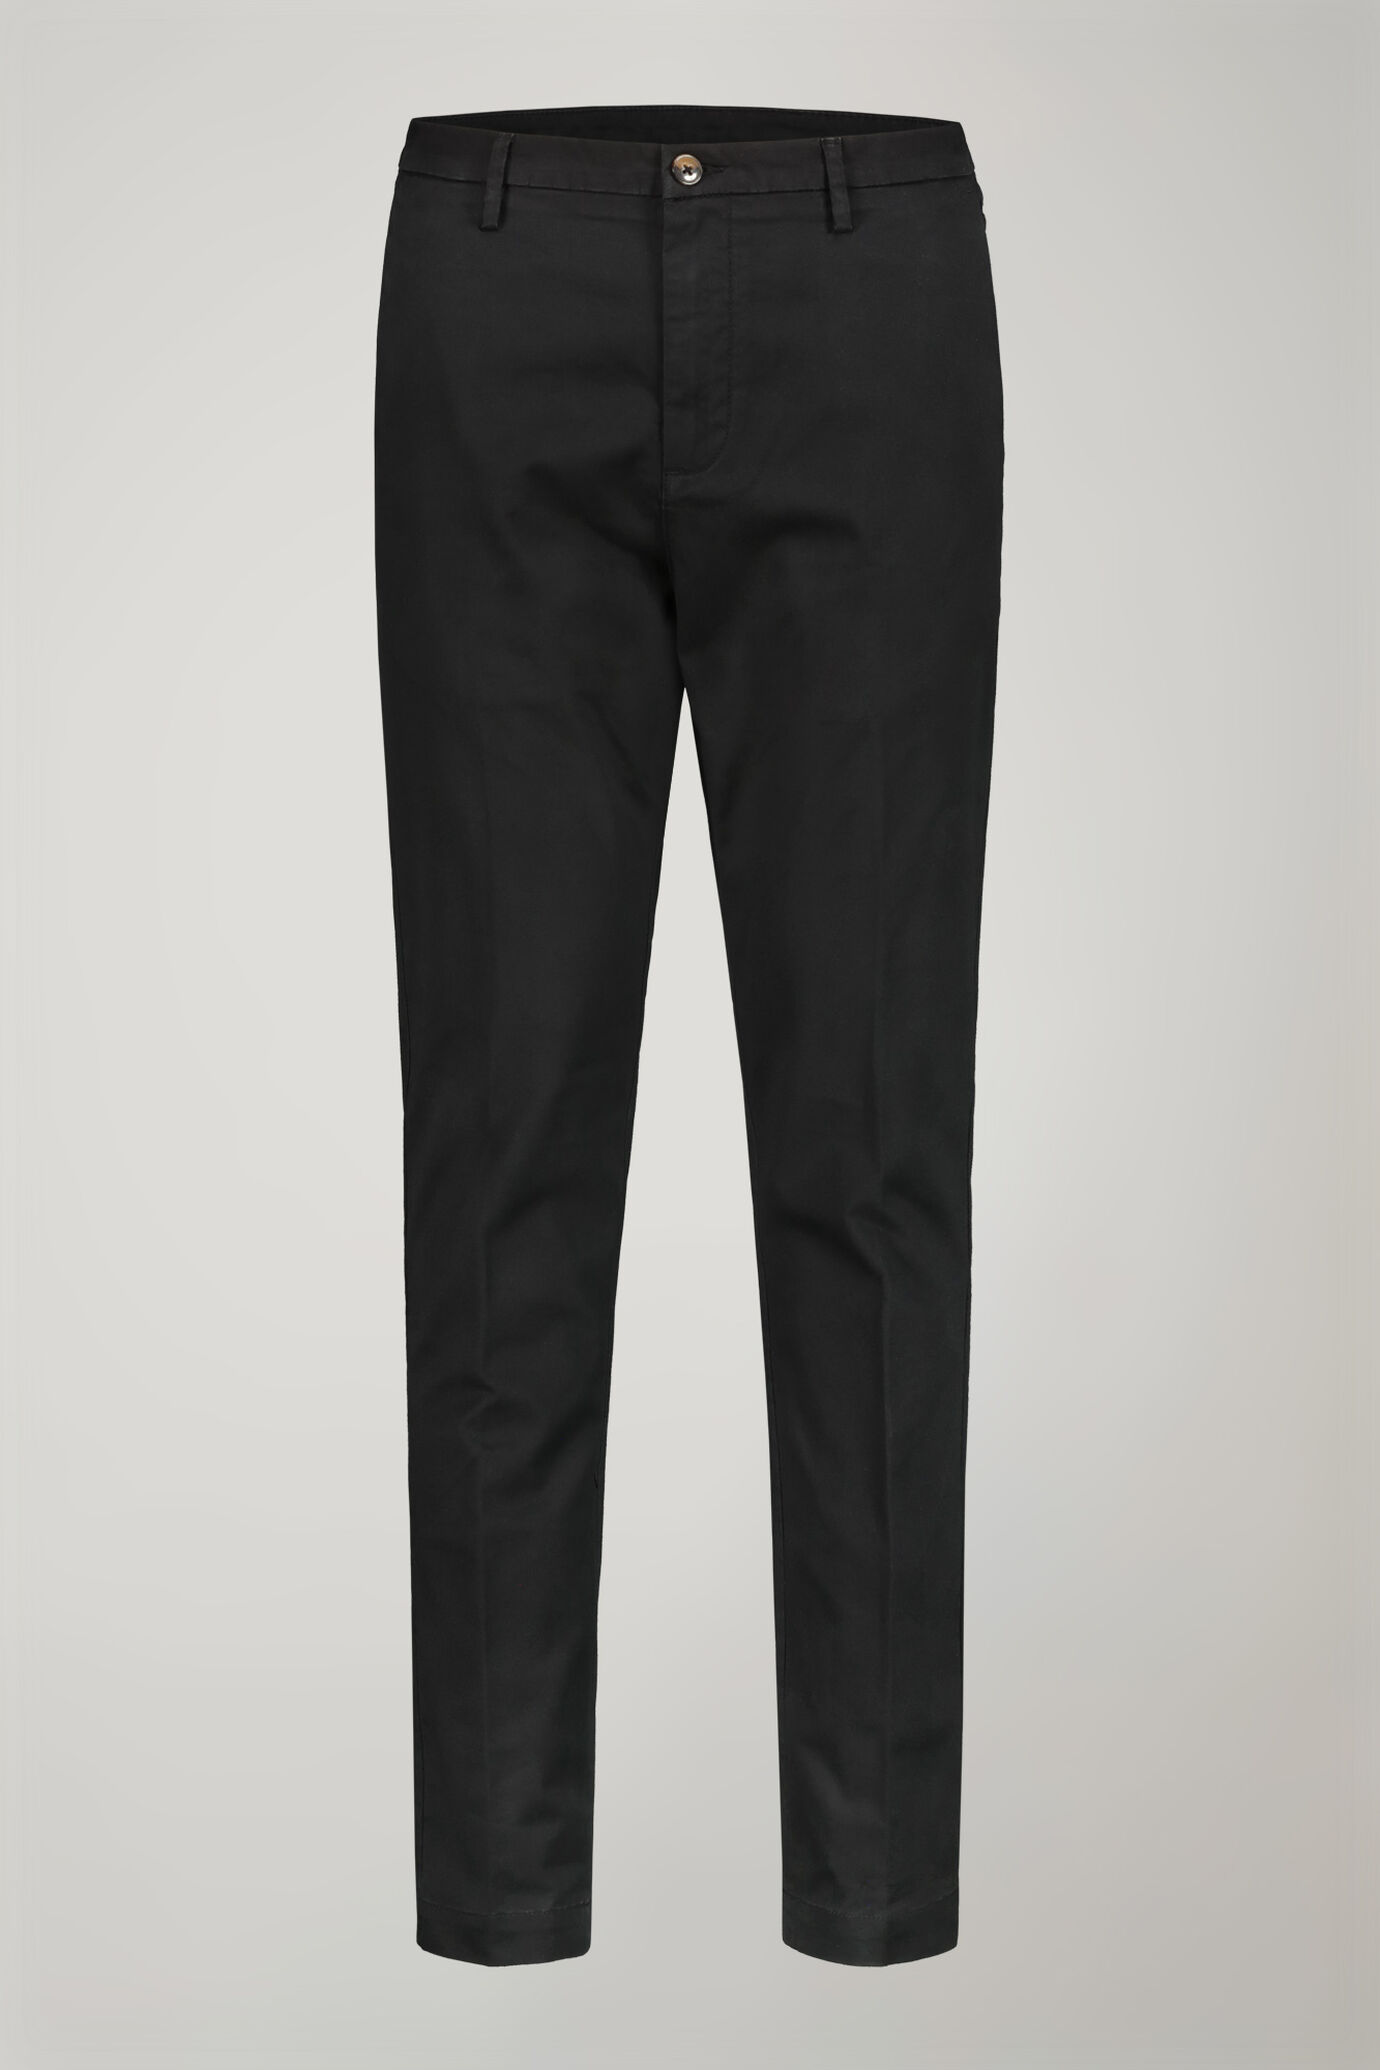 Men's chino trousers classic twill construction perfect fit image number 4